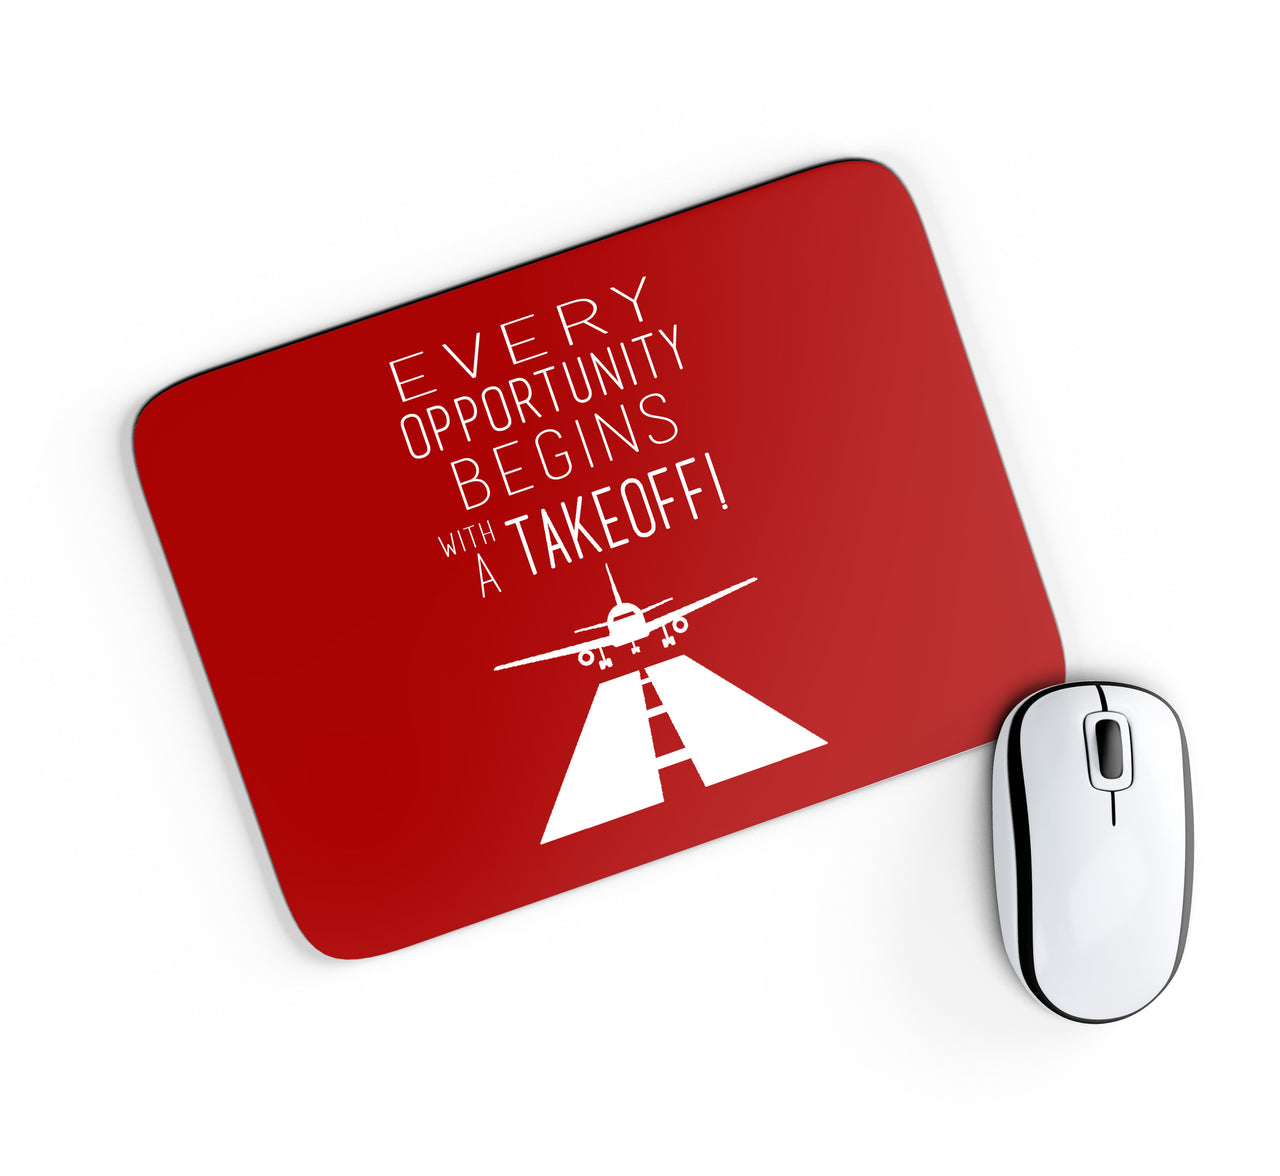 Every Opportunity Designed Mouse Pads